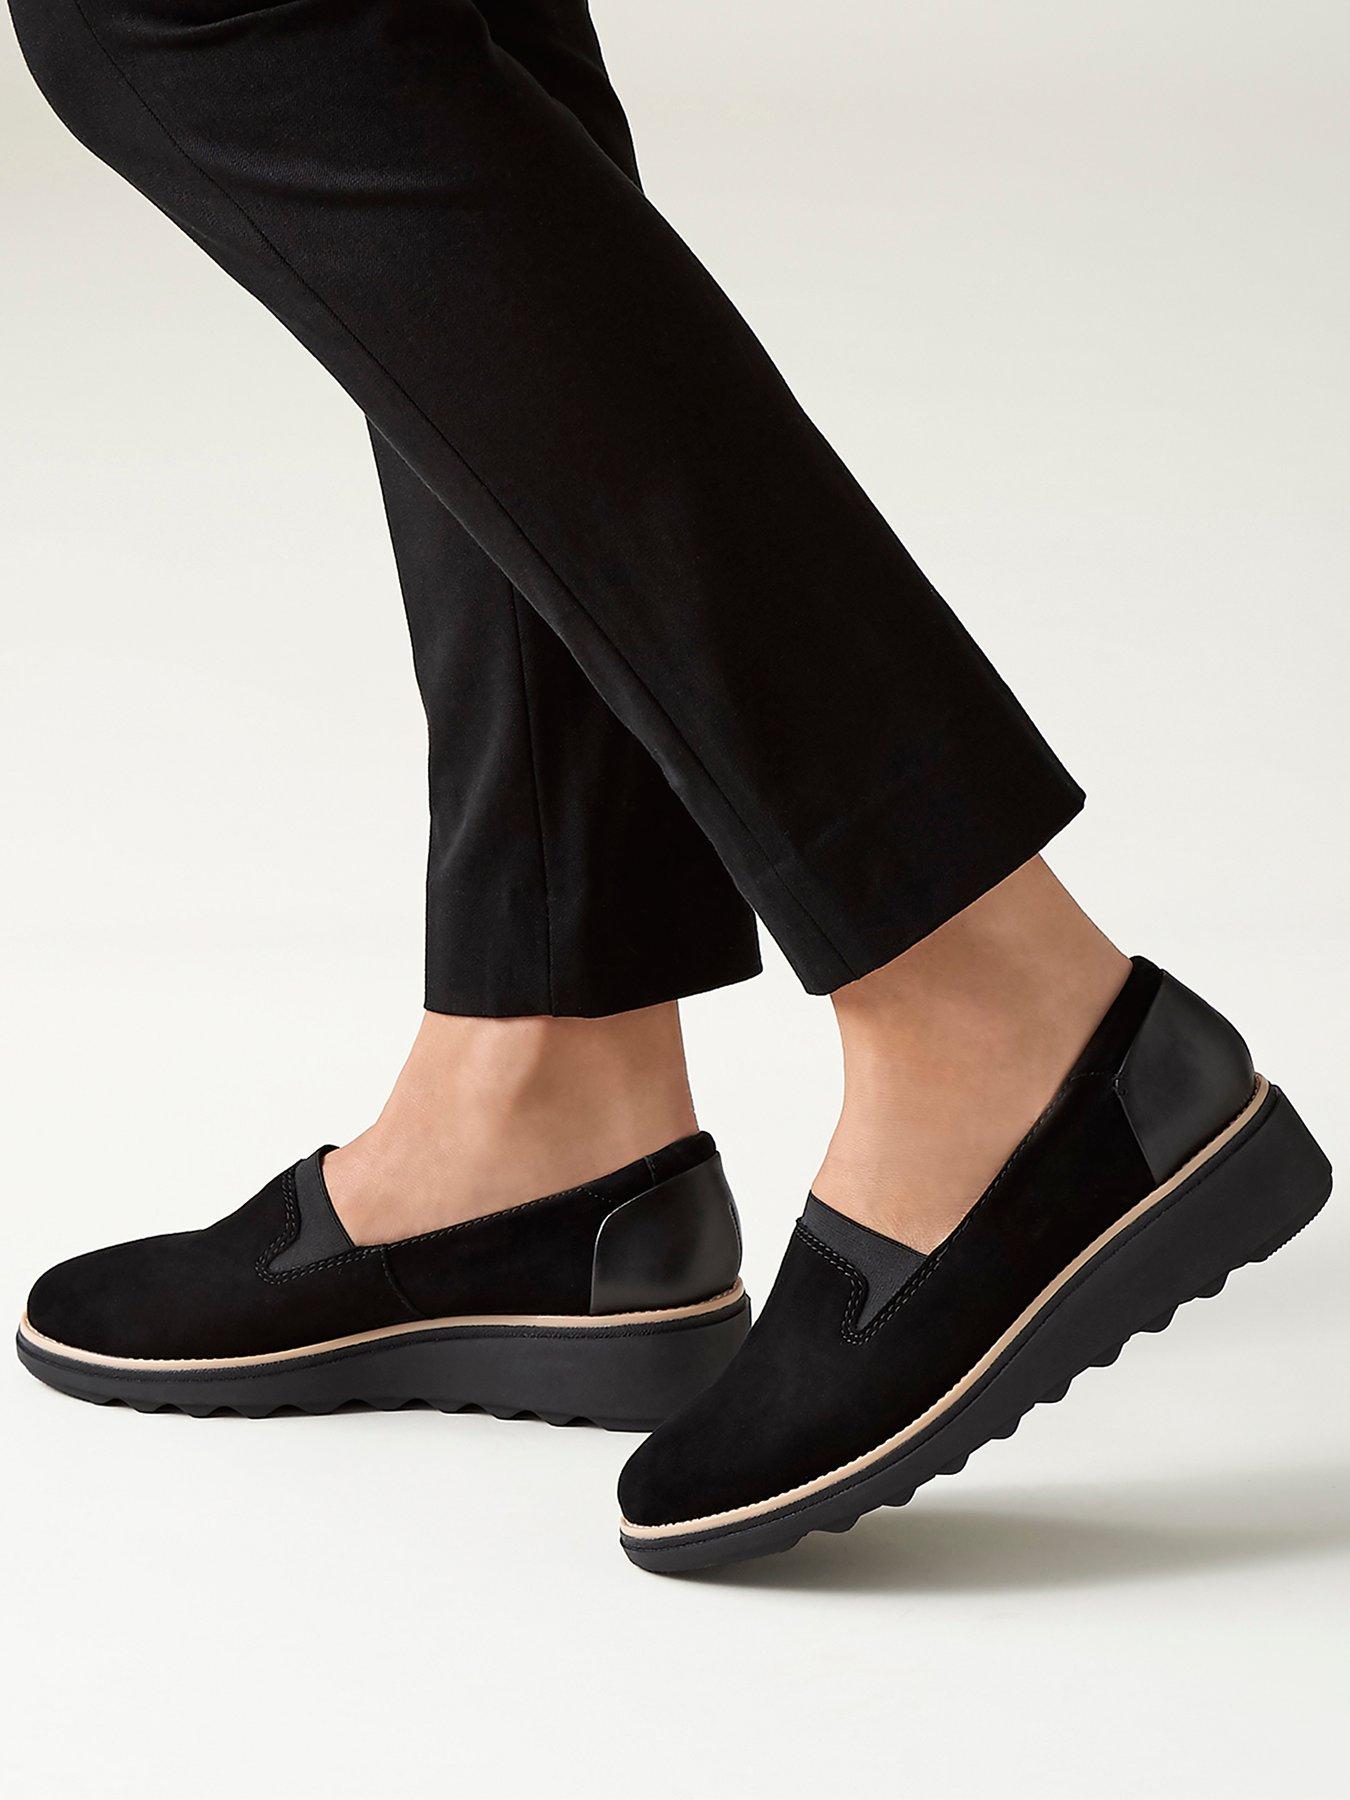 clarks wedge dress shoes